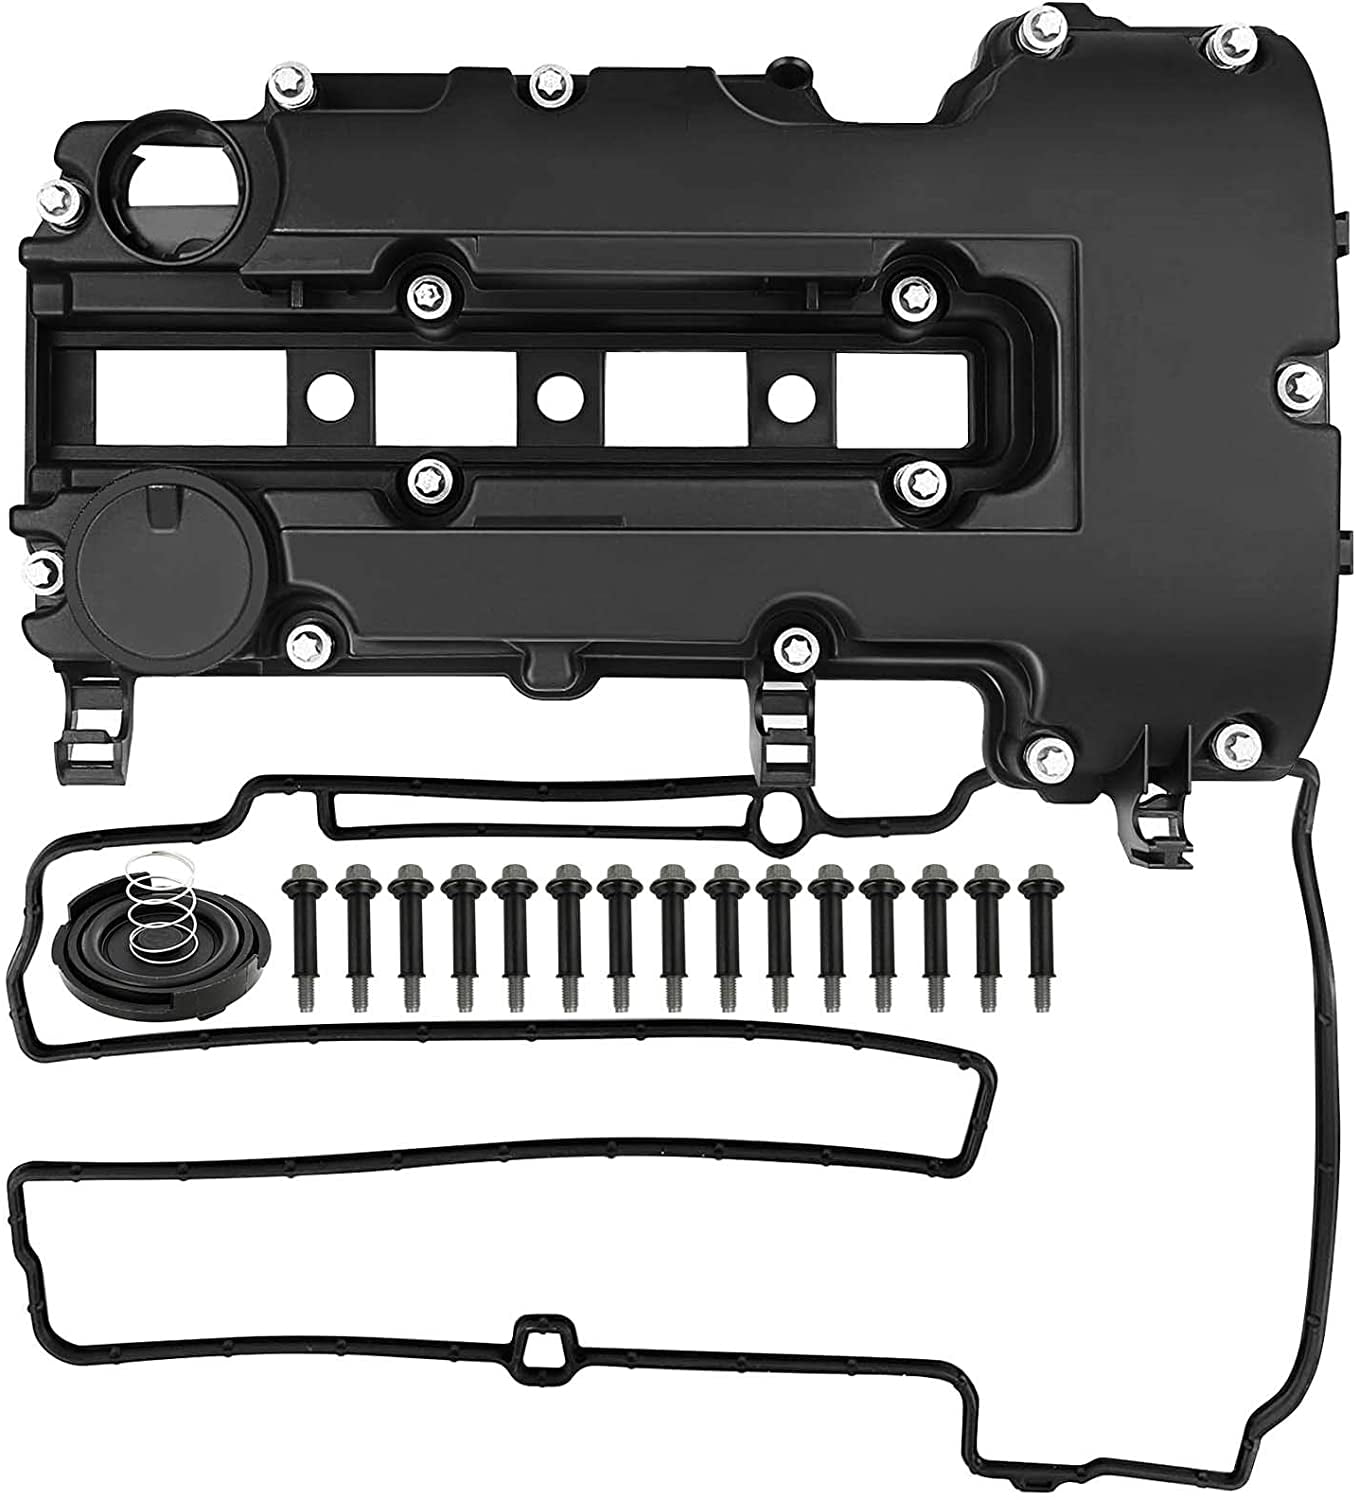 New For 2011-2015 Chevrolet Cruze Sonic Buick Cadillac 1.4L Engine Valve Cover 